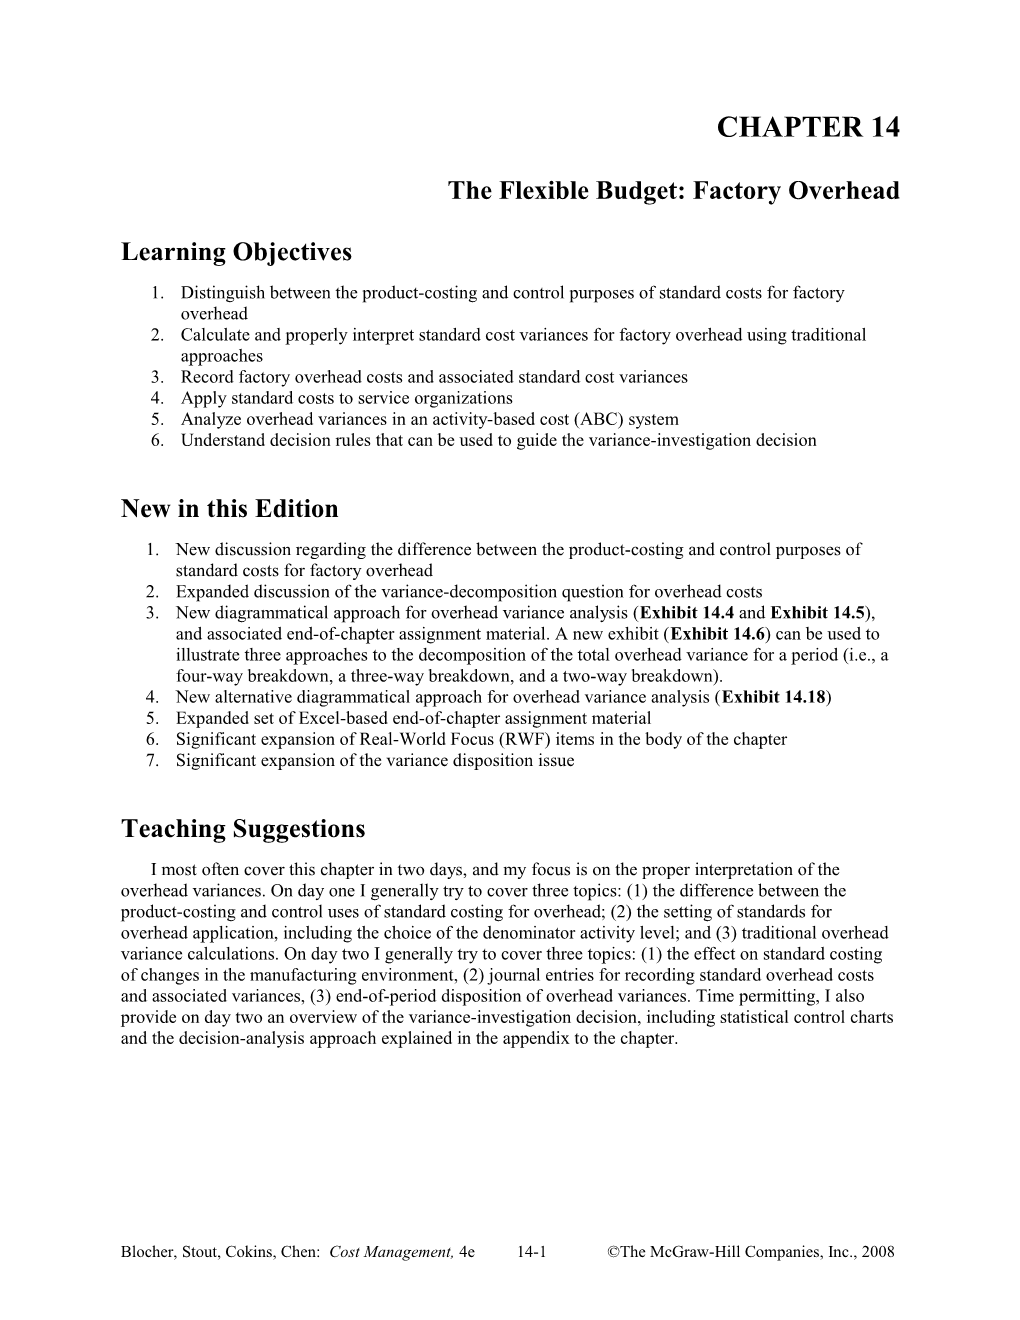 The Flexible Budget: Factory Overhead